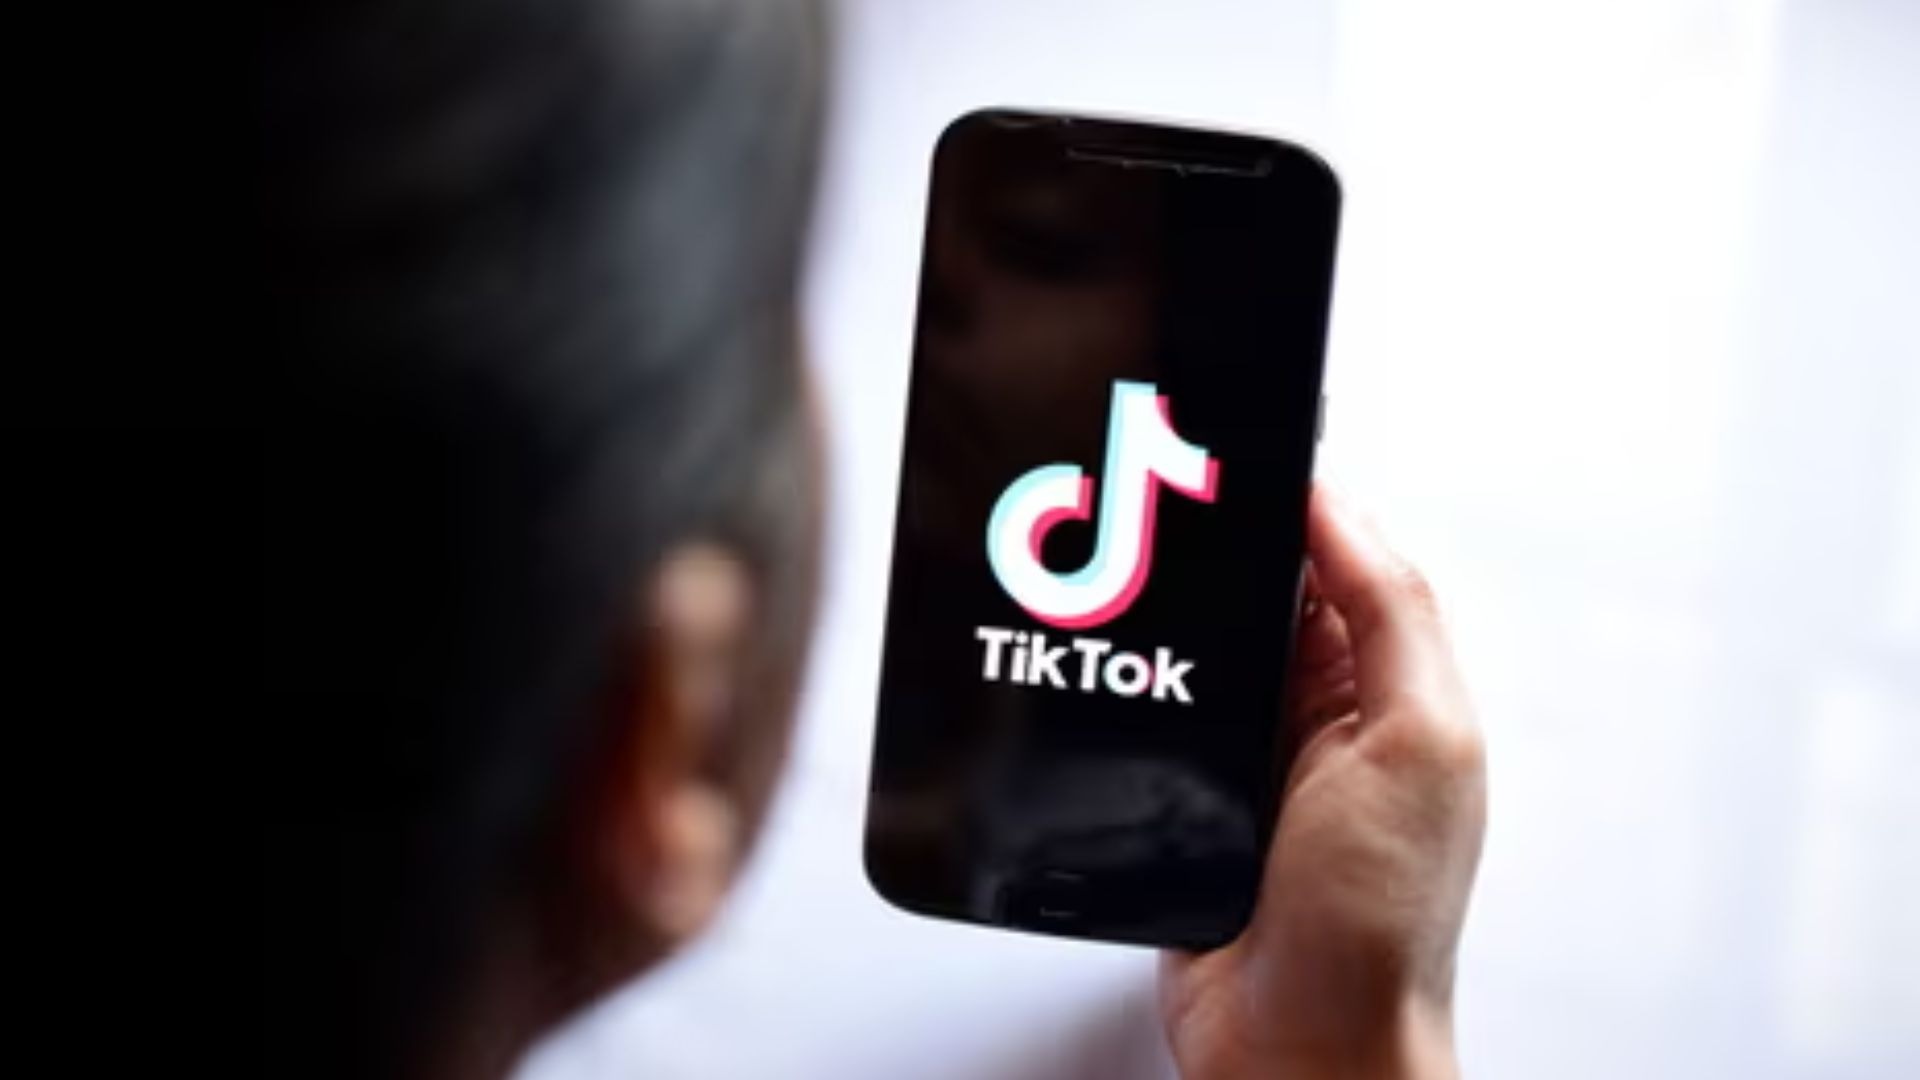 This TikTok Trend Can Put Millions At Risk, Here’s Why